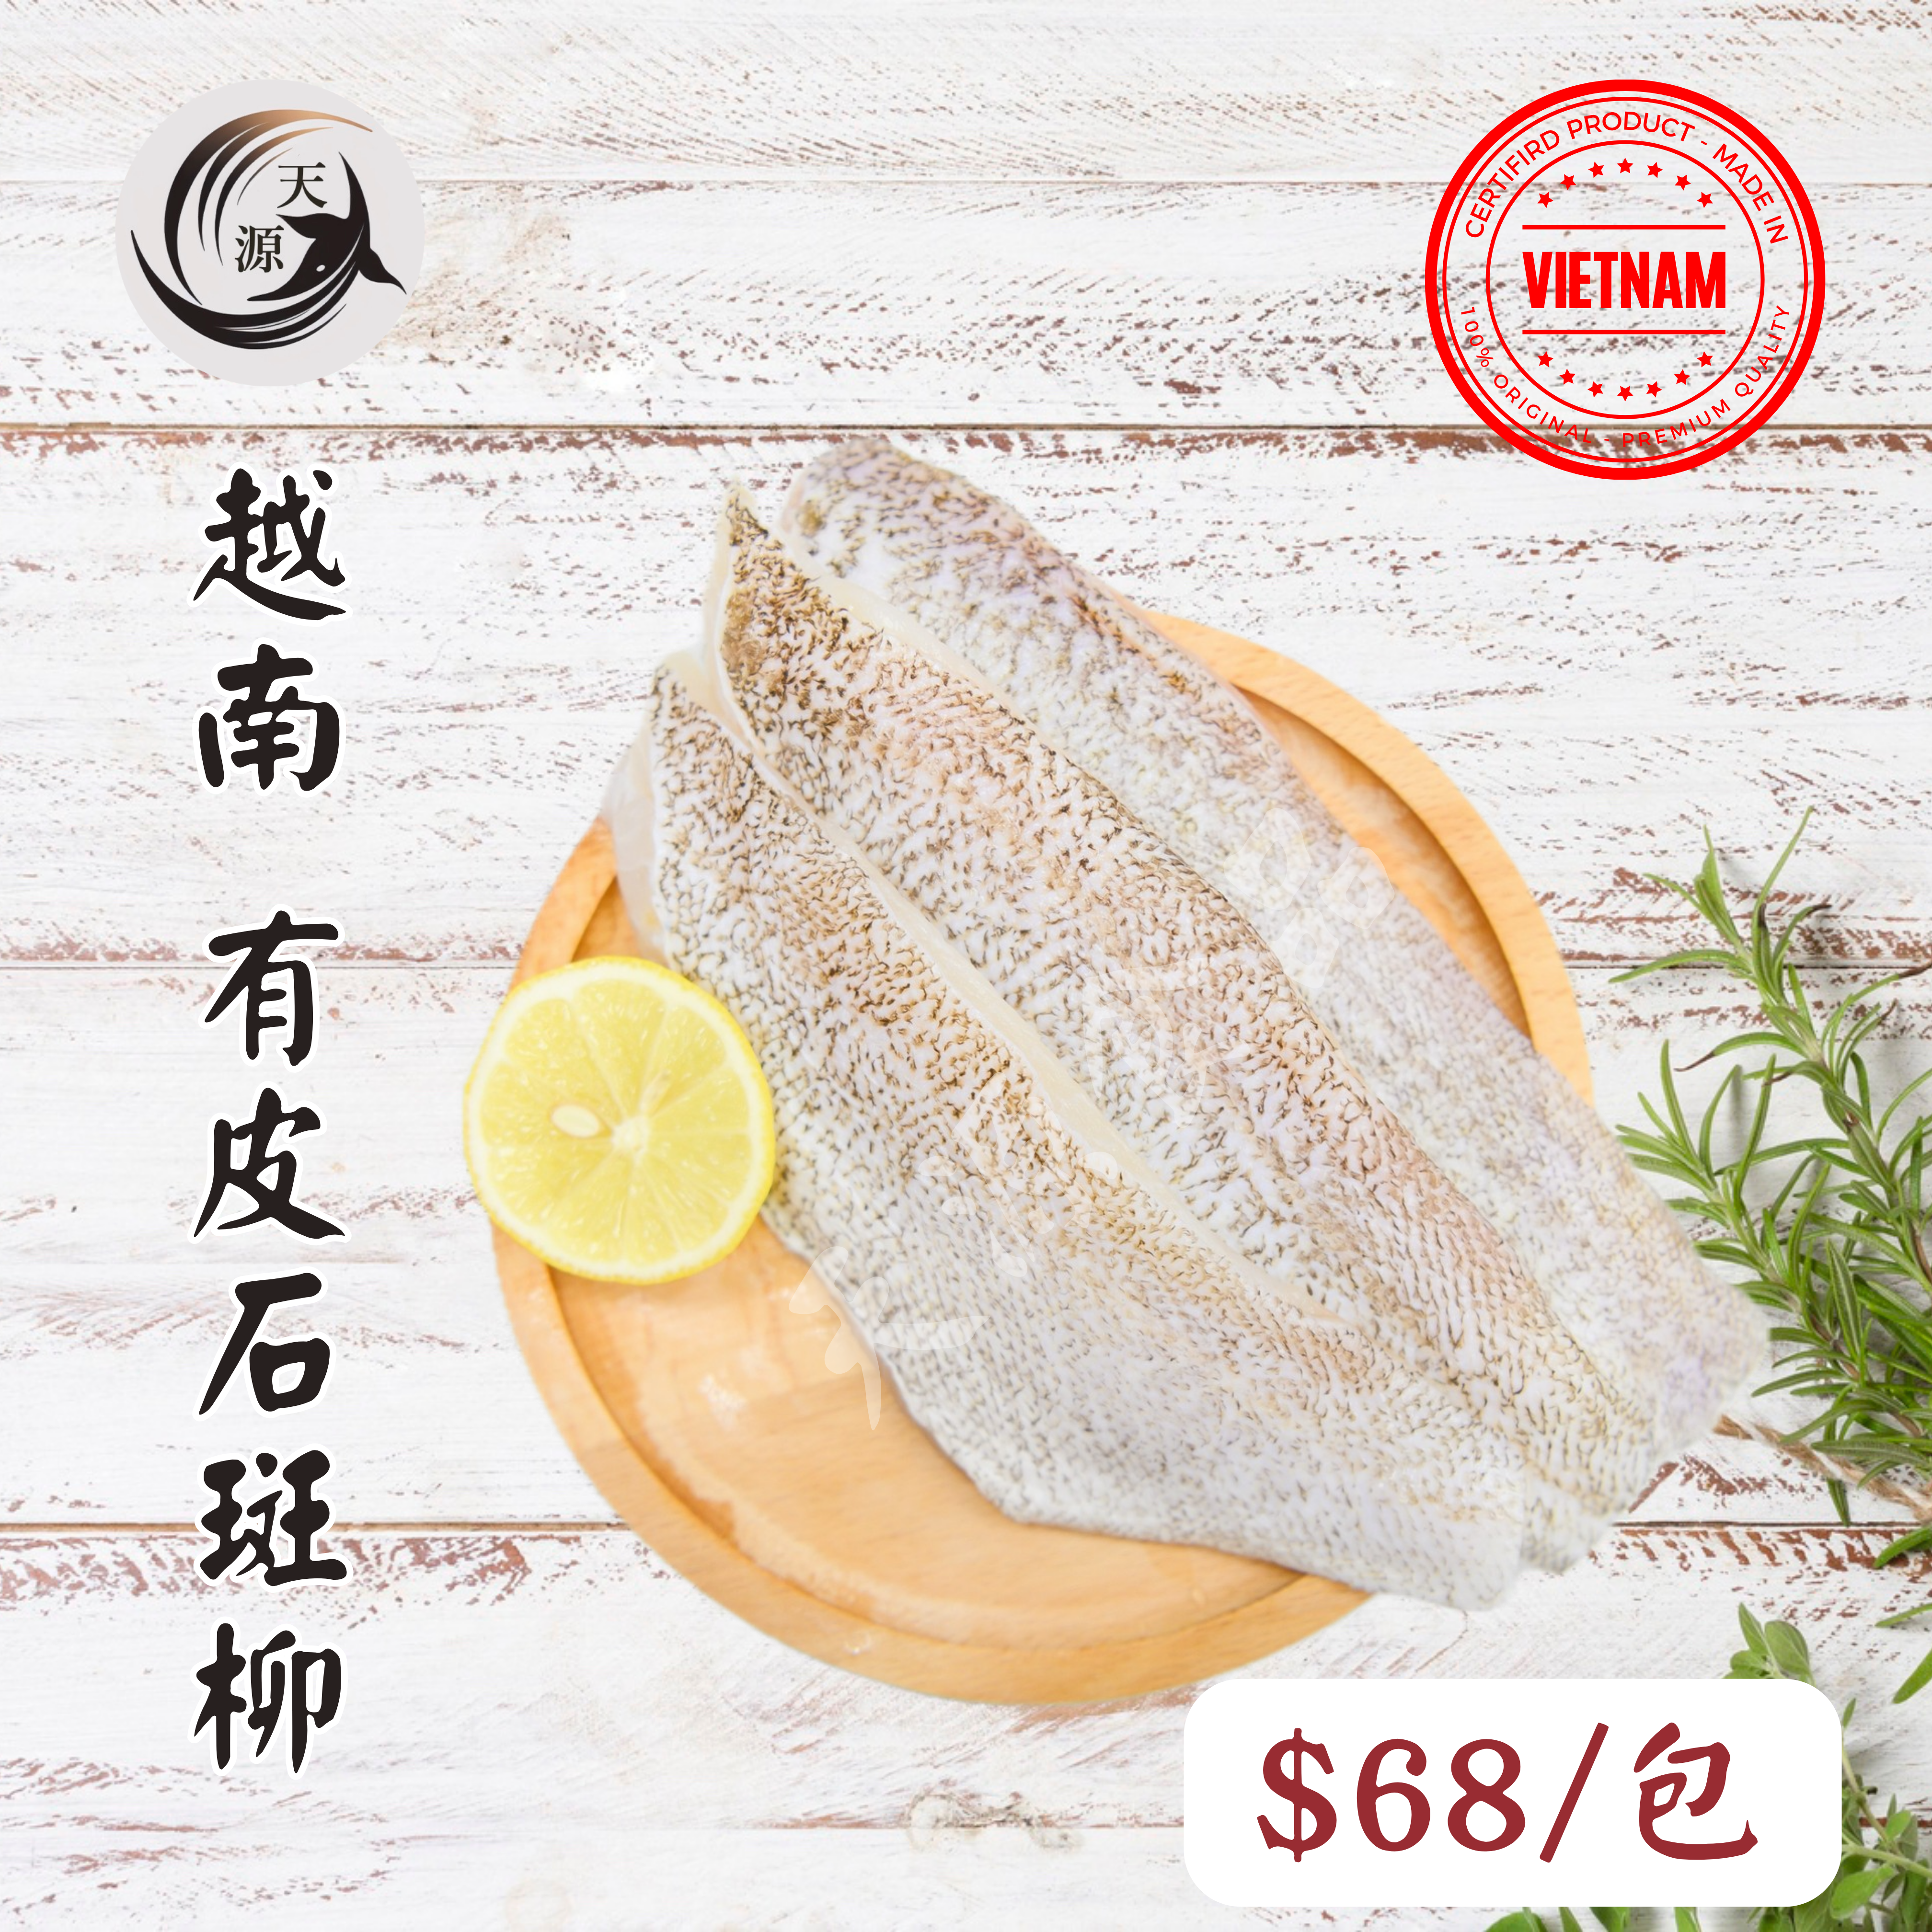 Vietnamese Grouper Willow with Skin 450g